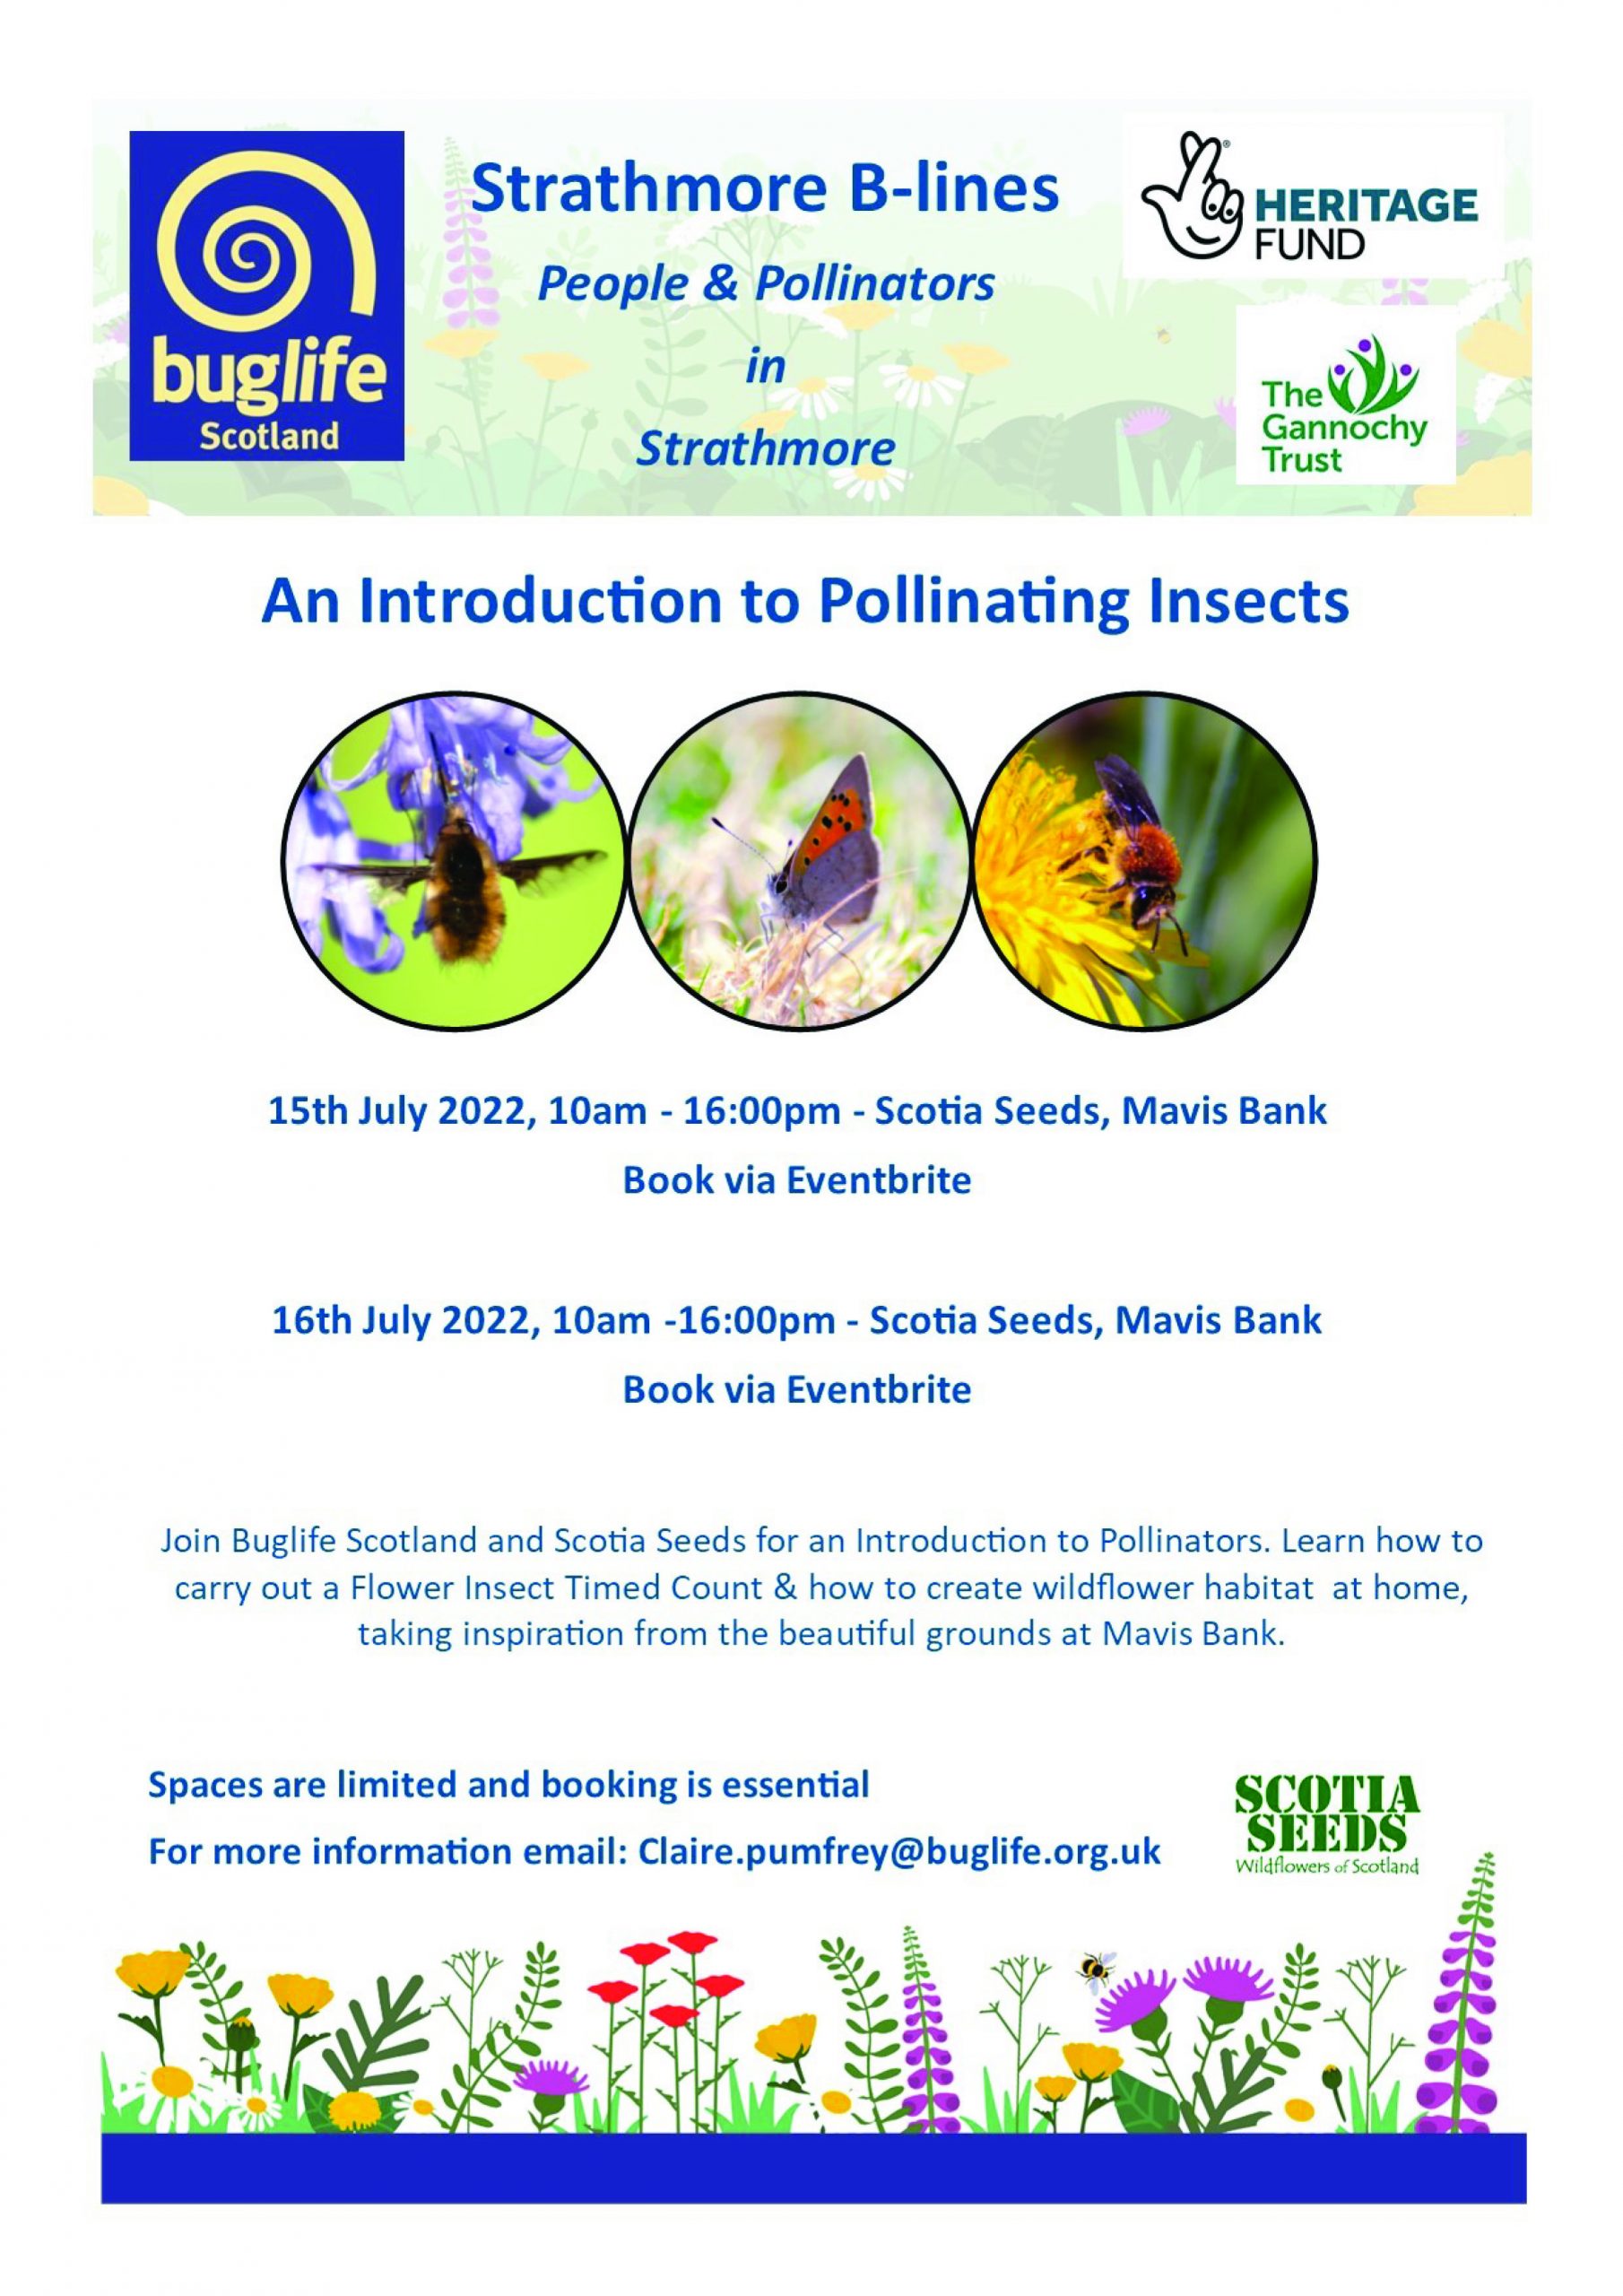 An Introduction to Pollinating Insects workshop; come and find out about the beasties of Mavisbank with Buglife